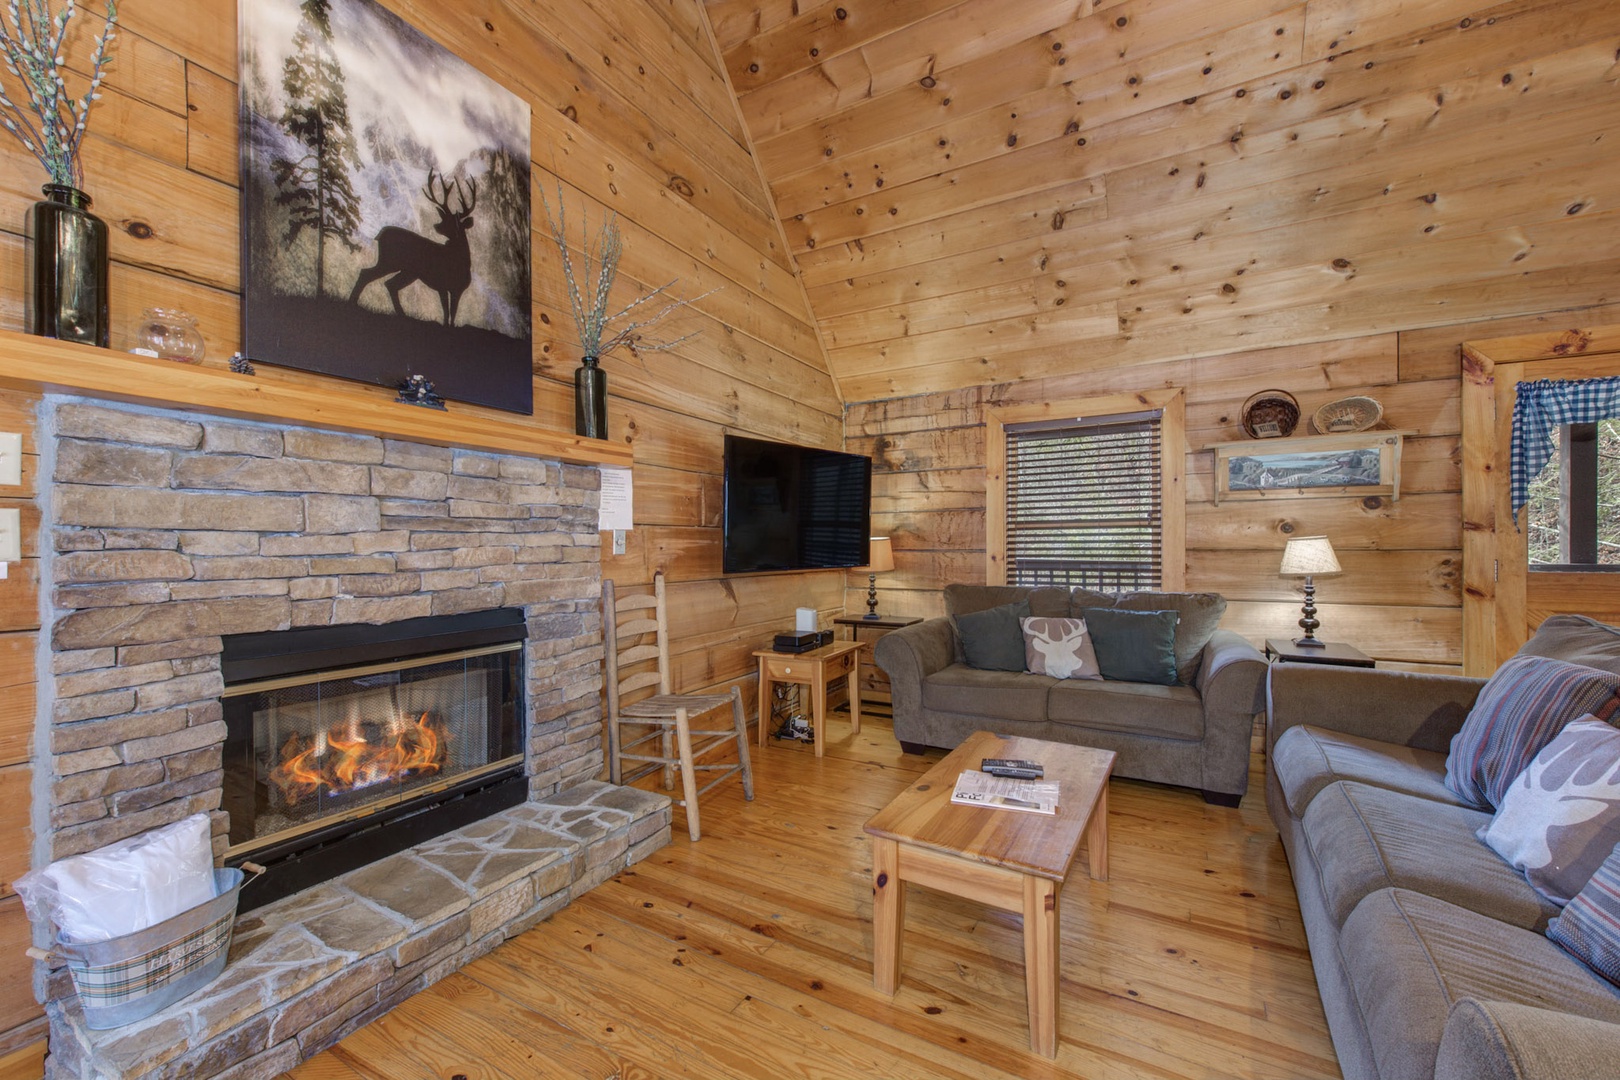 Curl up by the cozy seasonal fireplace & enjoy a movie night at home